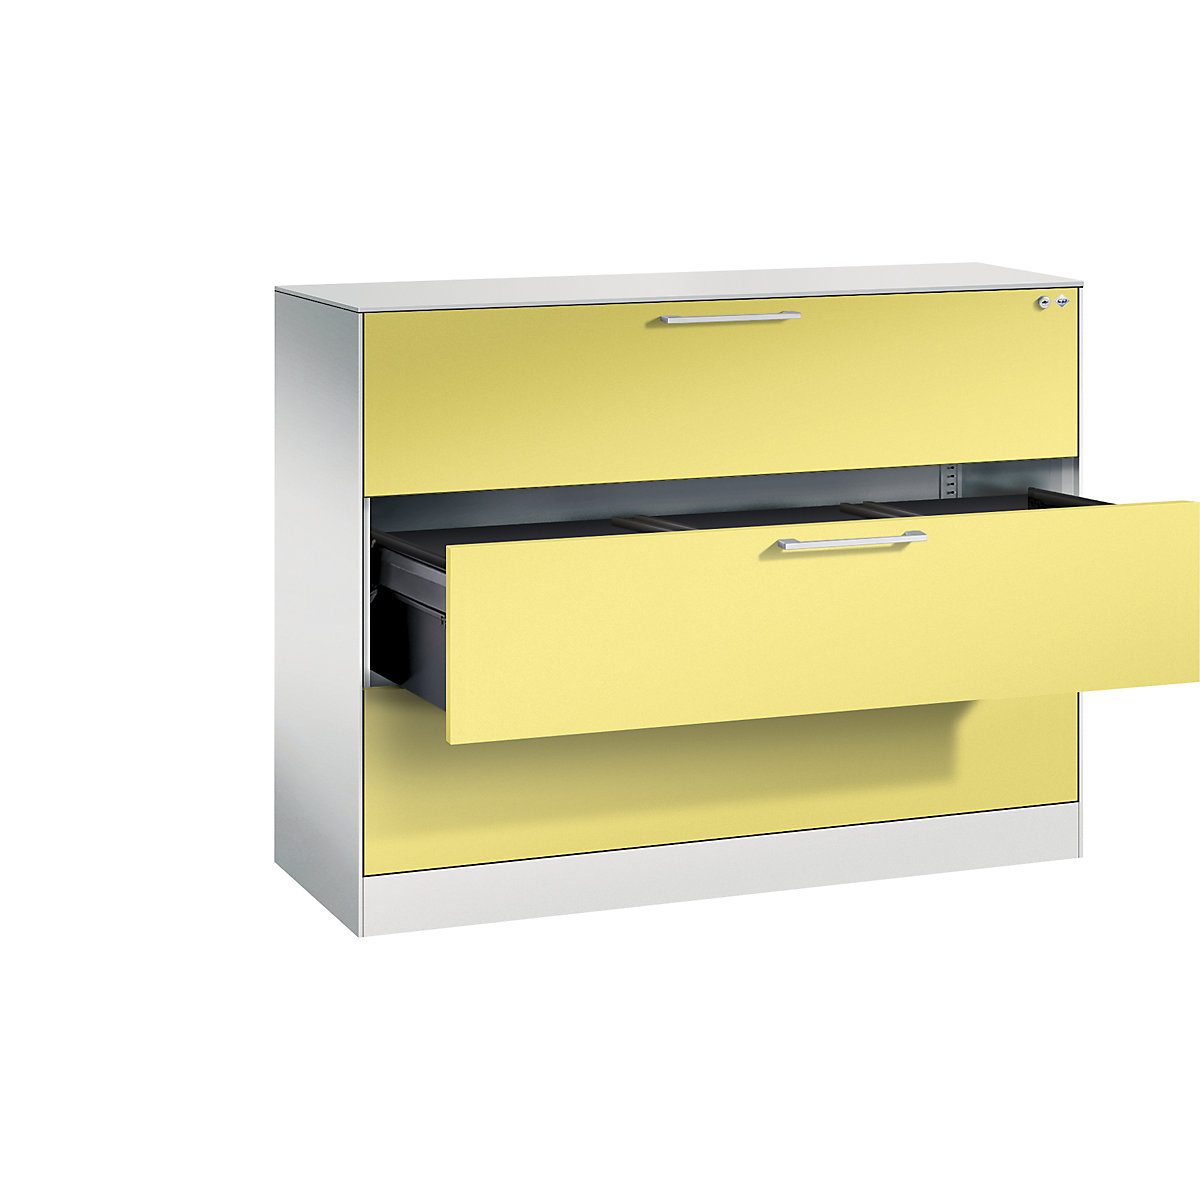 ASISTO suspension filing cabinet – C+P, width 1200 mm, with 3 drawers, light grey/sulphur yellow-13